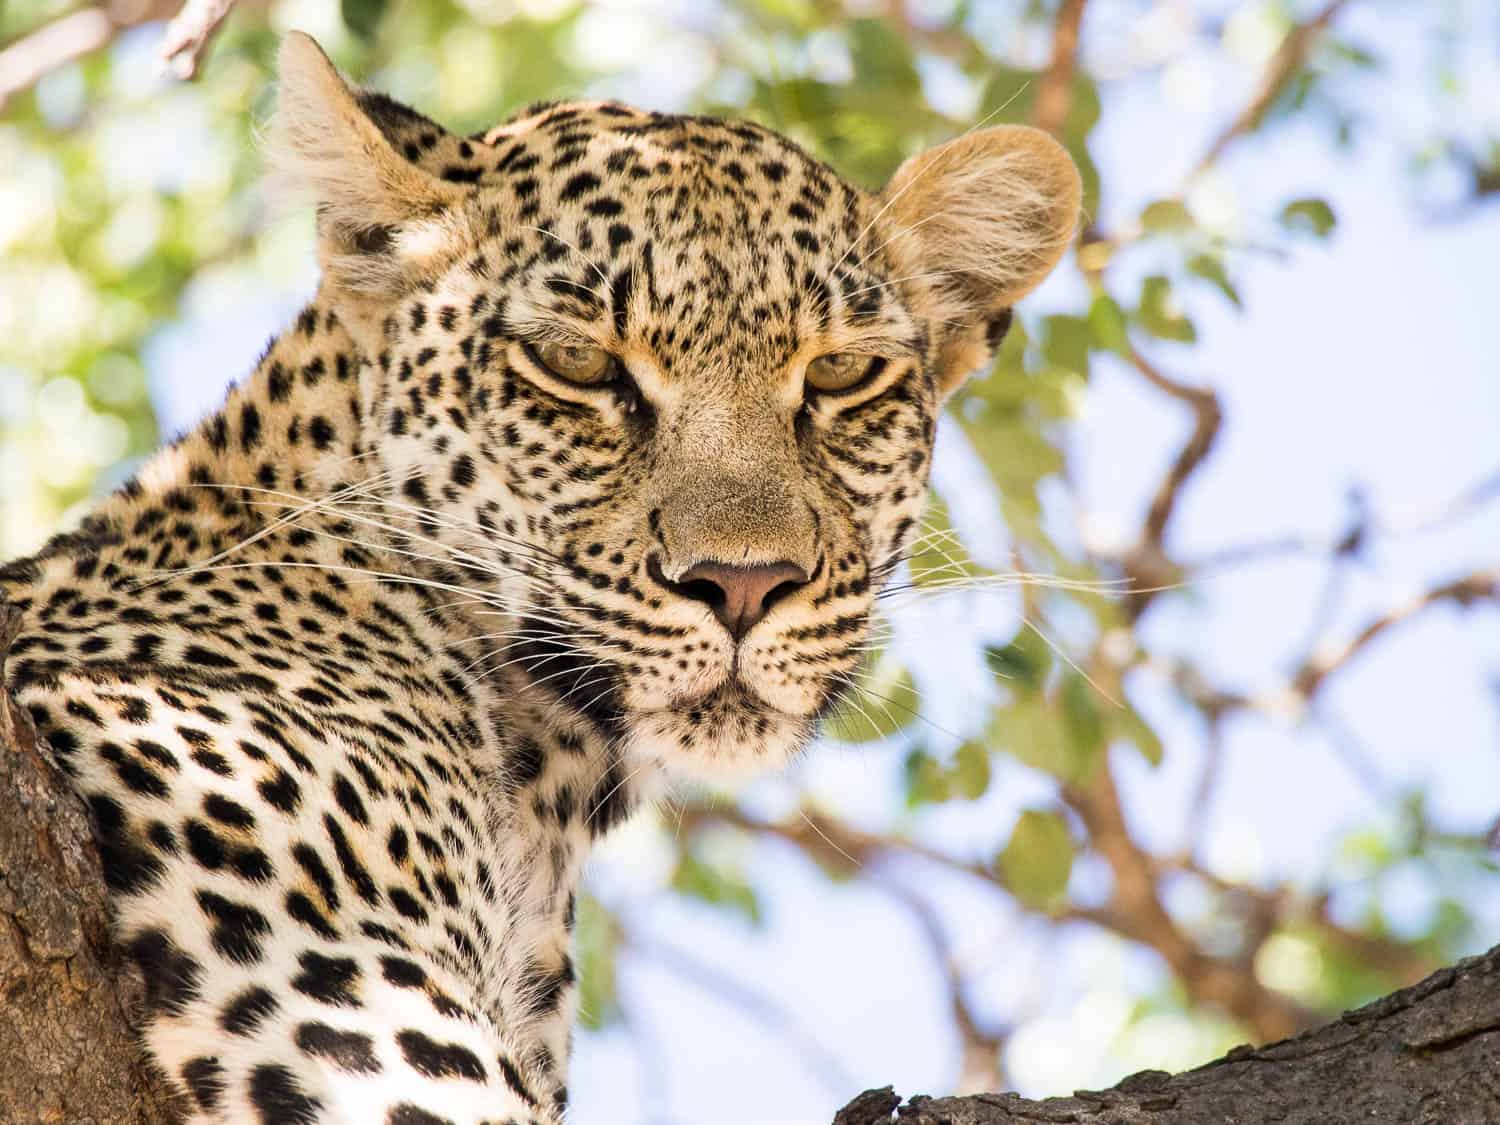 Umlani bushcamp review: leopard in a tree on a game drive